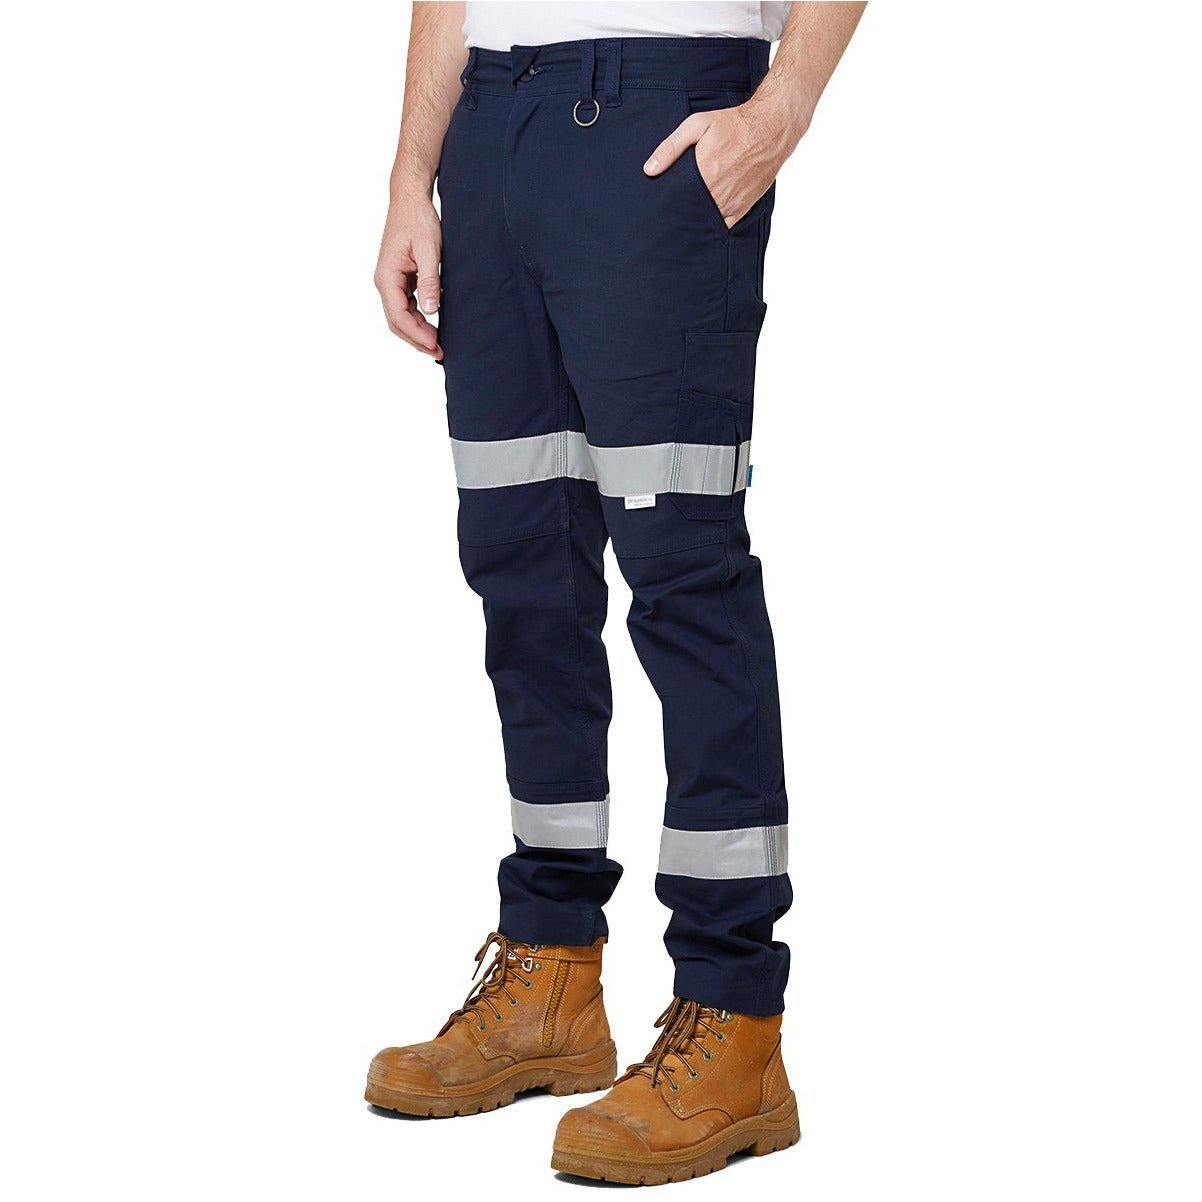 Reflective Mens Streetwear Cargo Amazon Track Pants Slim Fit, Perfect For  Urban Night Club, Dace Harem, Trendy Bottom 230422 From You01, $25.71 |  DHgate.Com